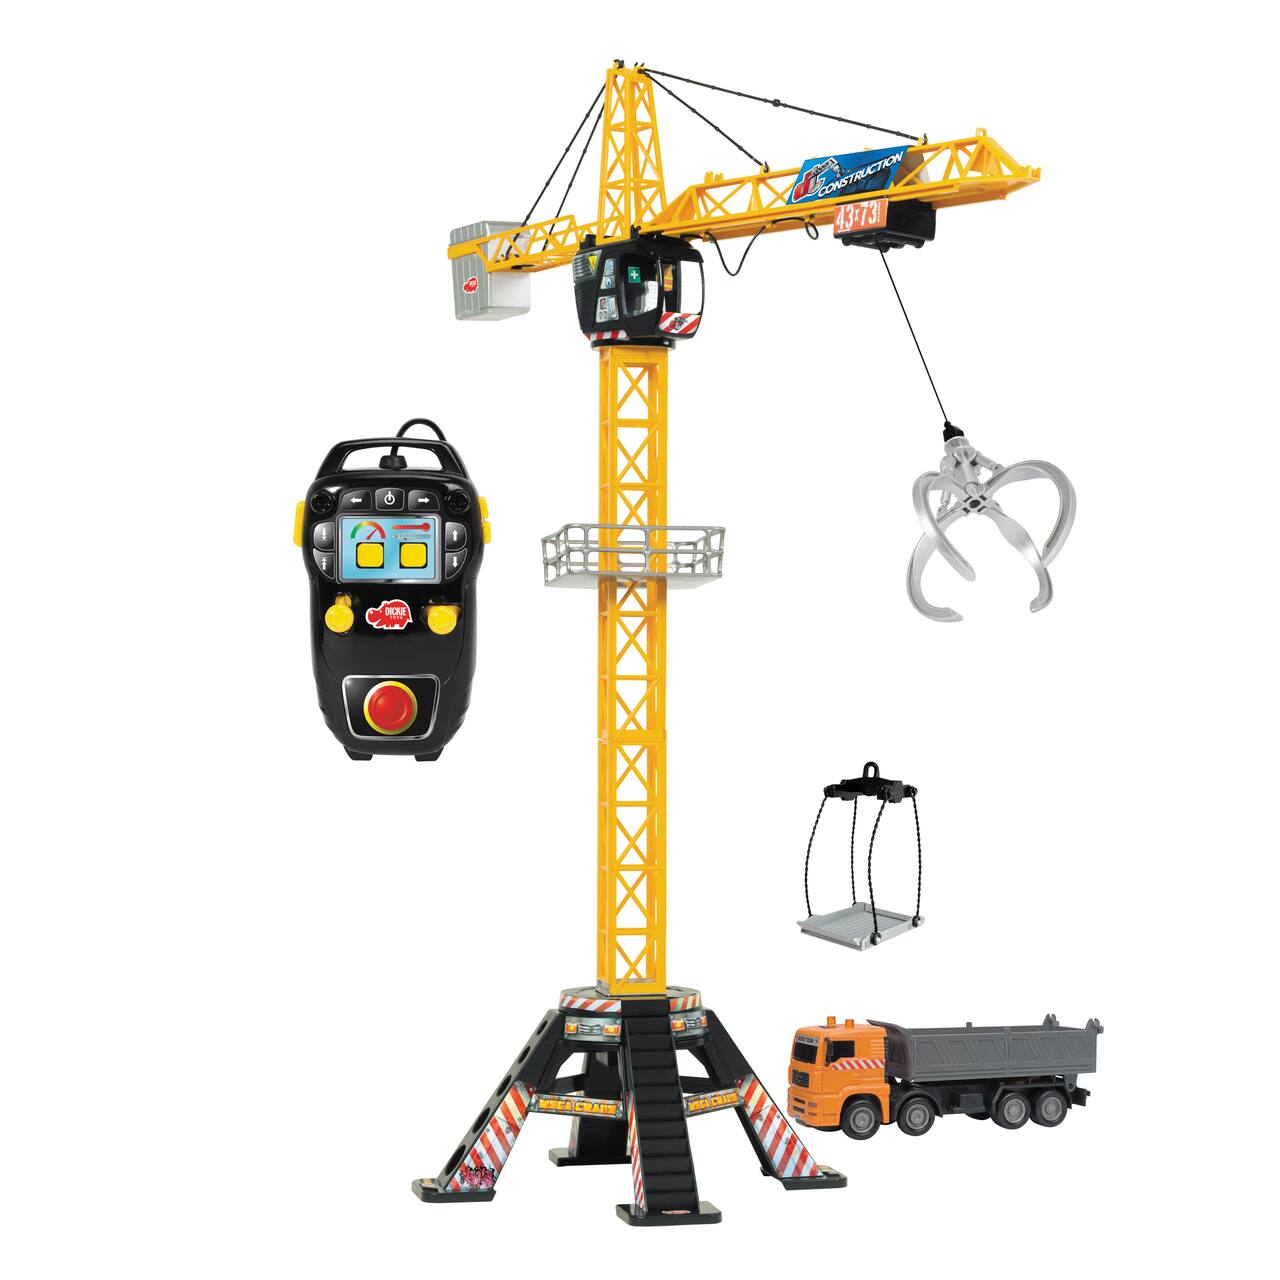 Dickie Toys Mega Crane Remote Control Set with Truck